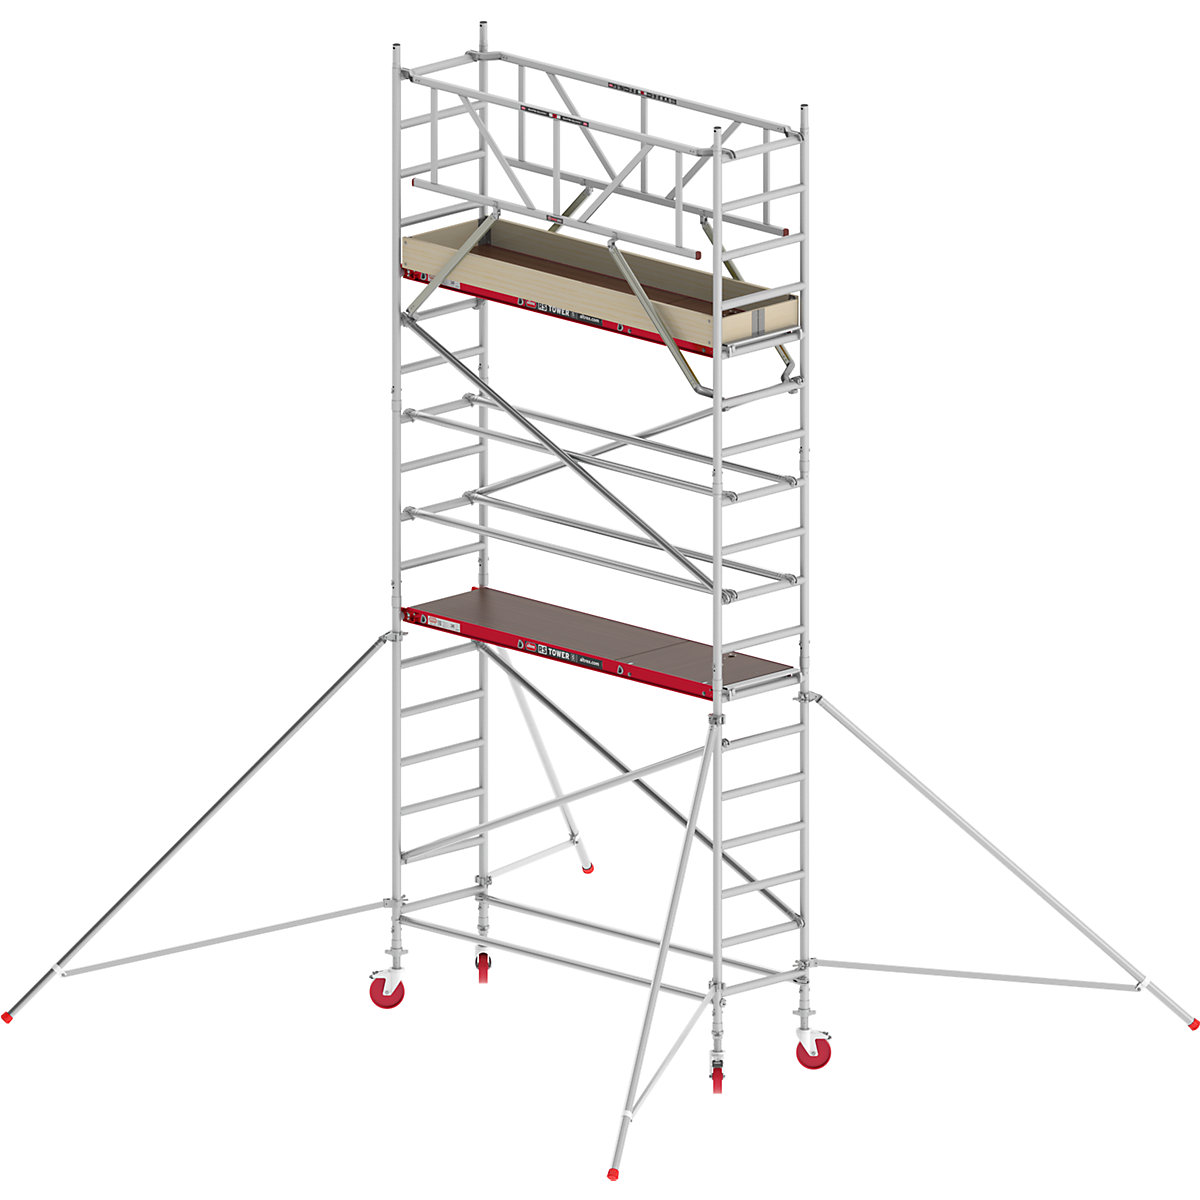 RS TOWER 41 slim mobile access tower – Altrex, wooden platform, length 2.45 m, working height 6.20 m-2